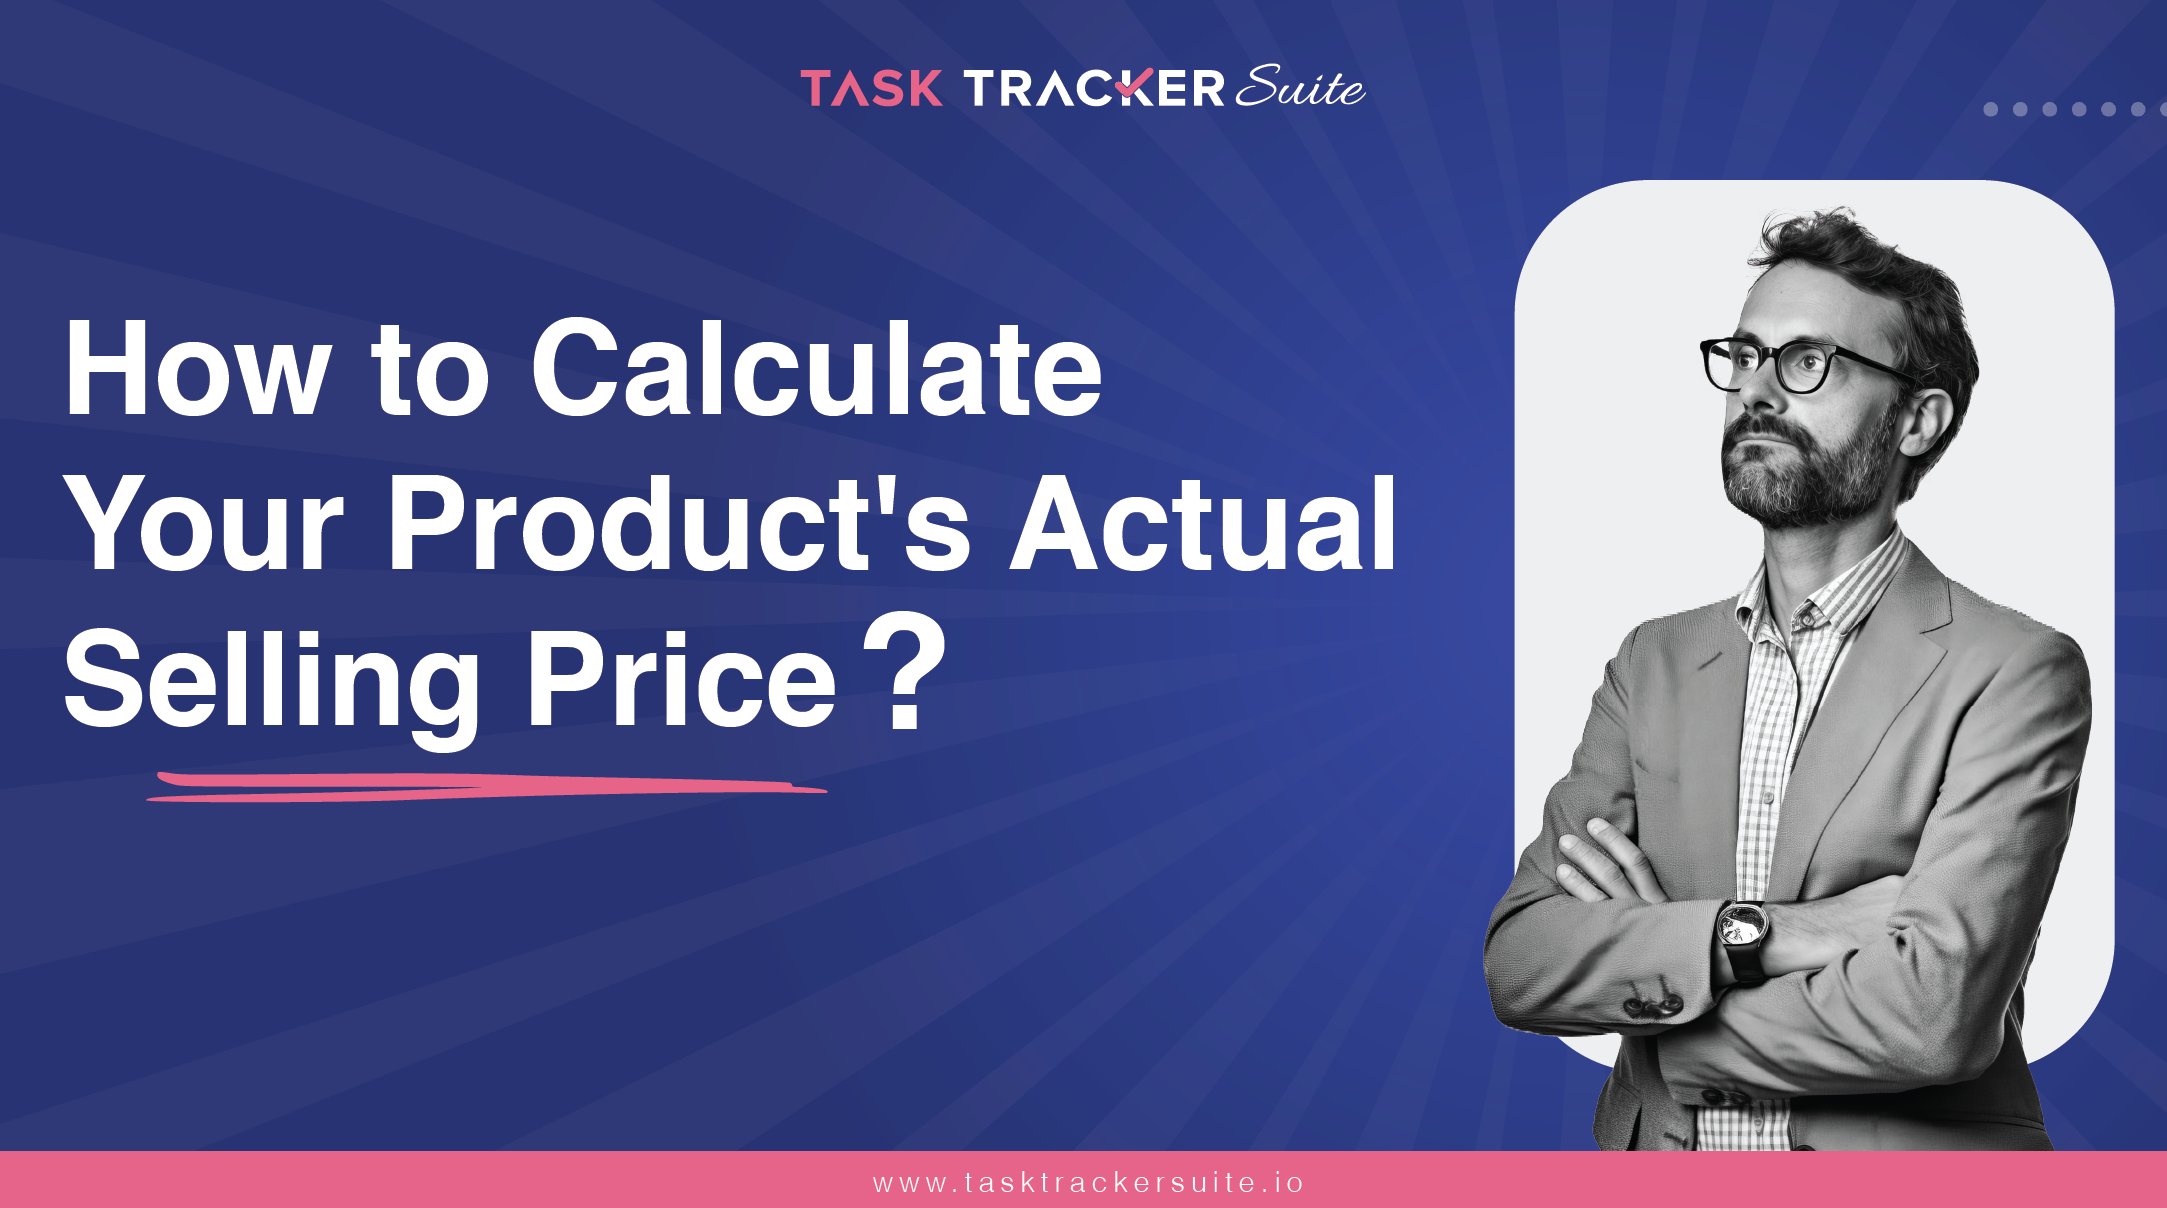 How to Calculate Your Product’s Actual Selling Price